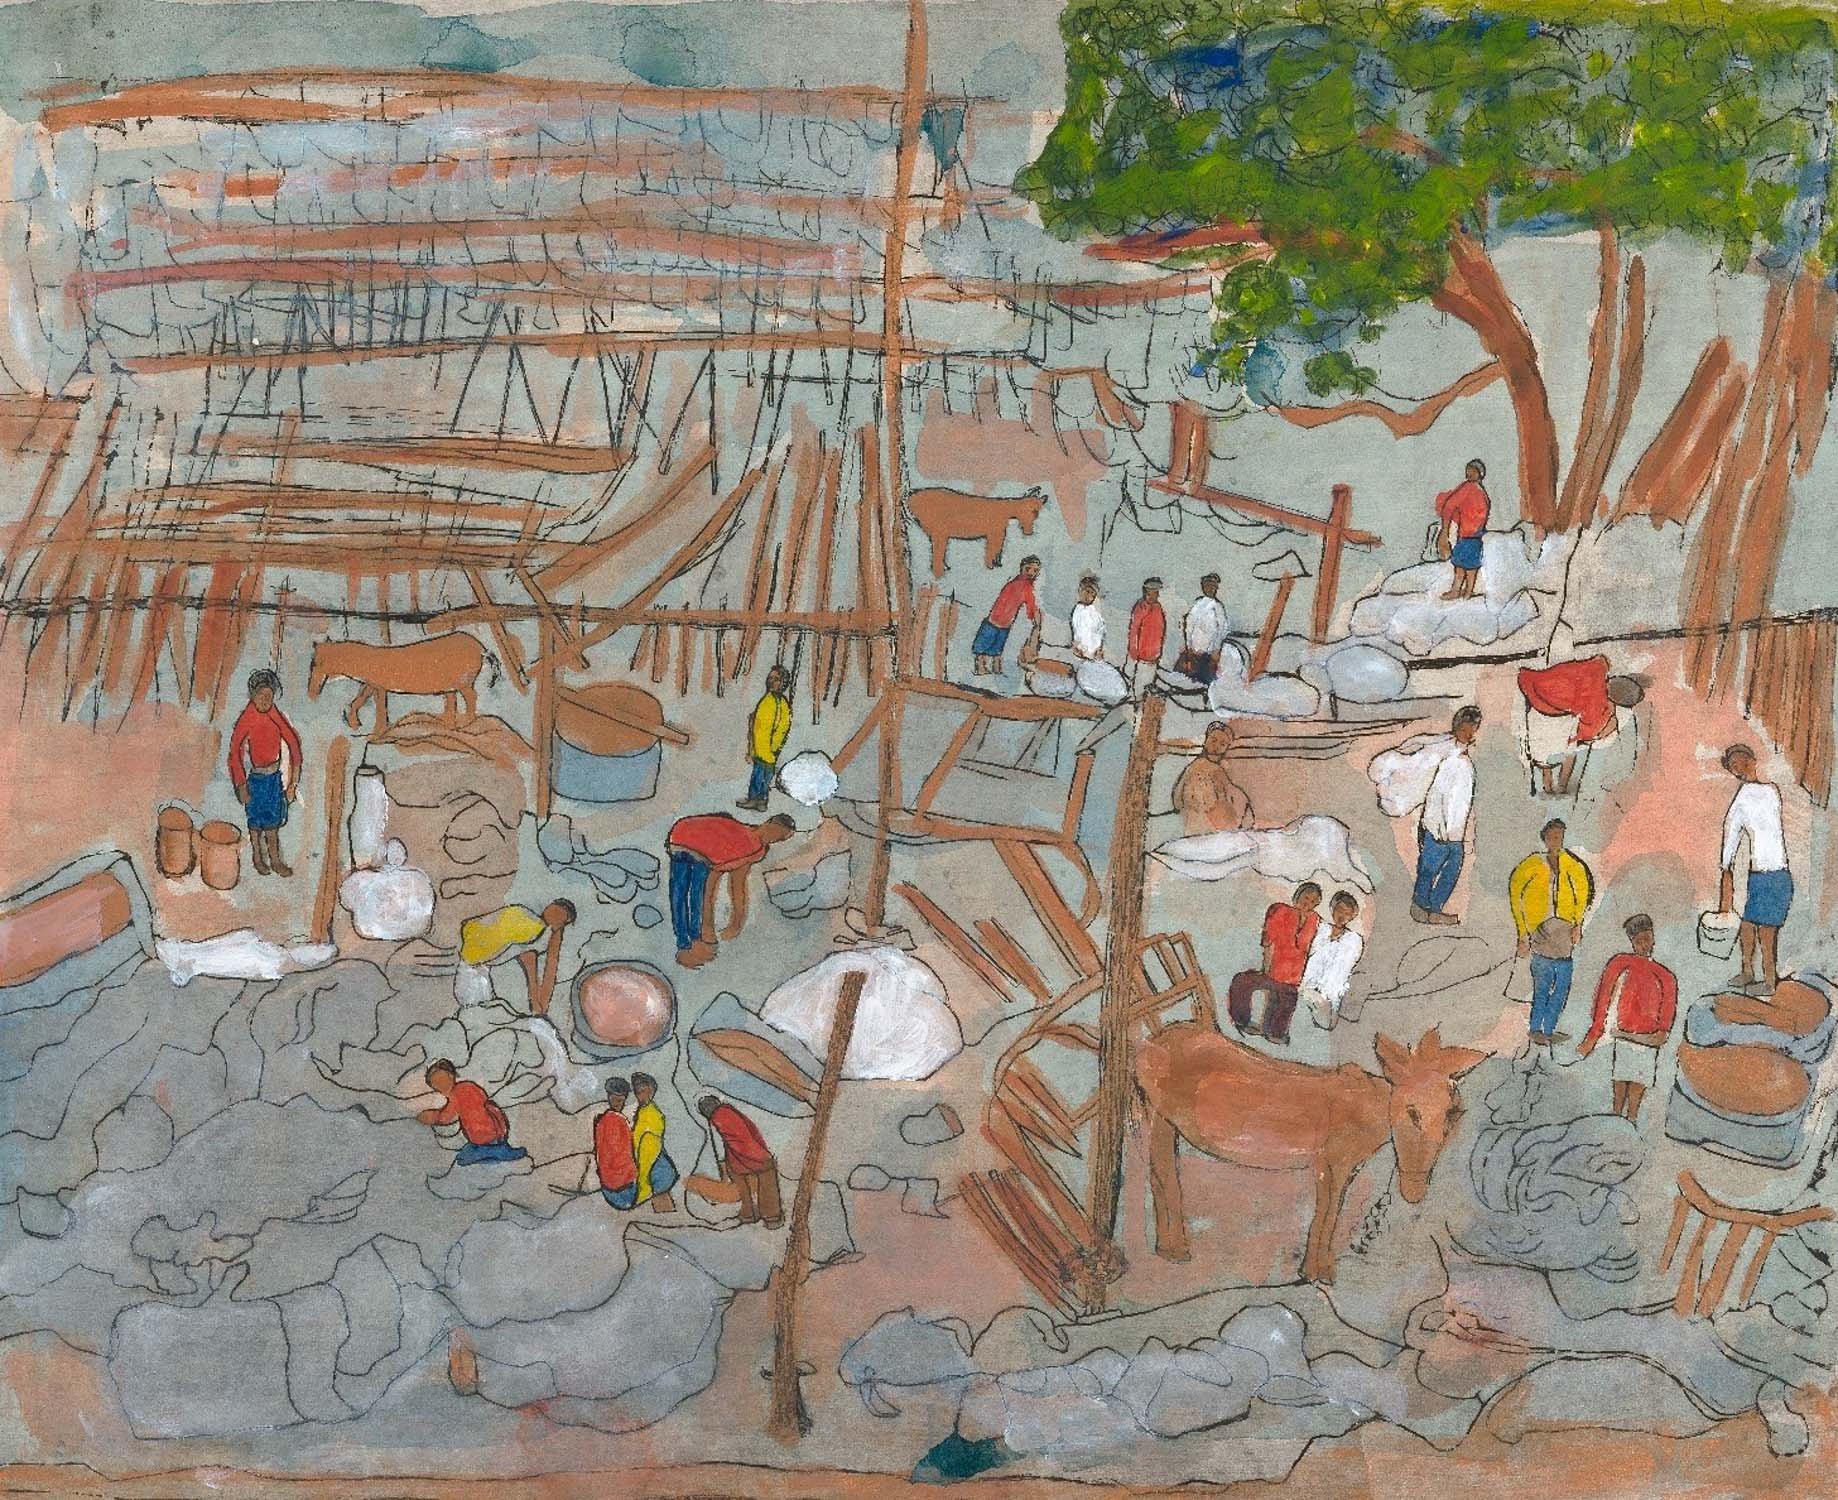  Chen Cheng Mei, ‘Laundry (India)’, 2008, etching on paper, 47.5 x 60.5cm. Collection of the artist’s family, Singapore. 